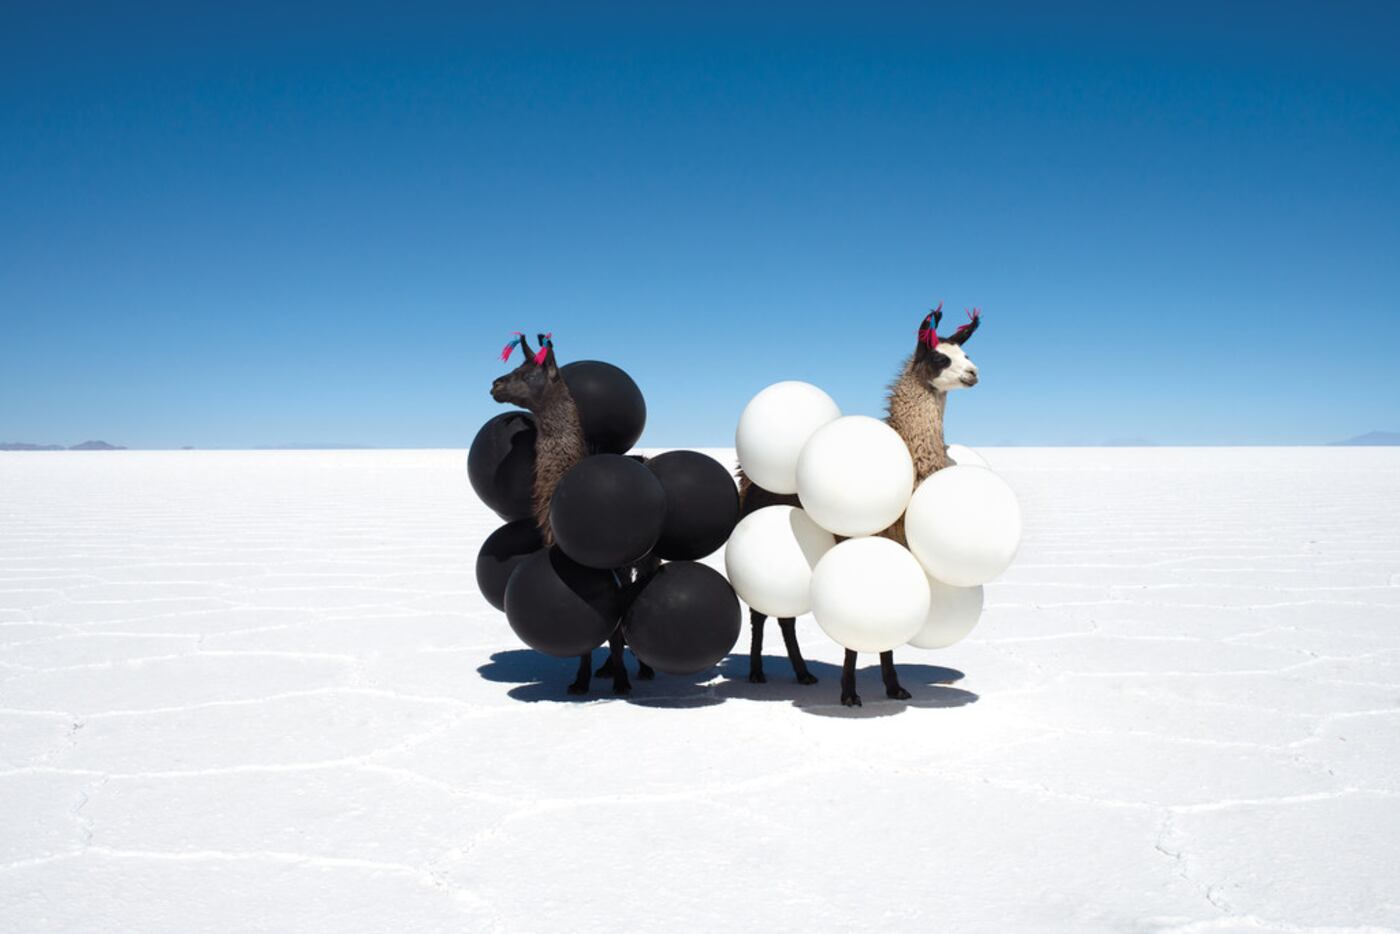 Malin's Llamas Black and White Balloons is a fan favorite, the photographer says.